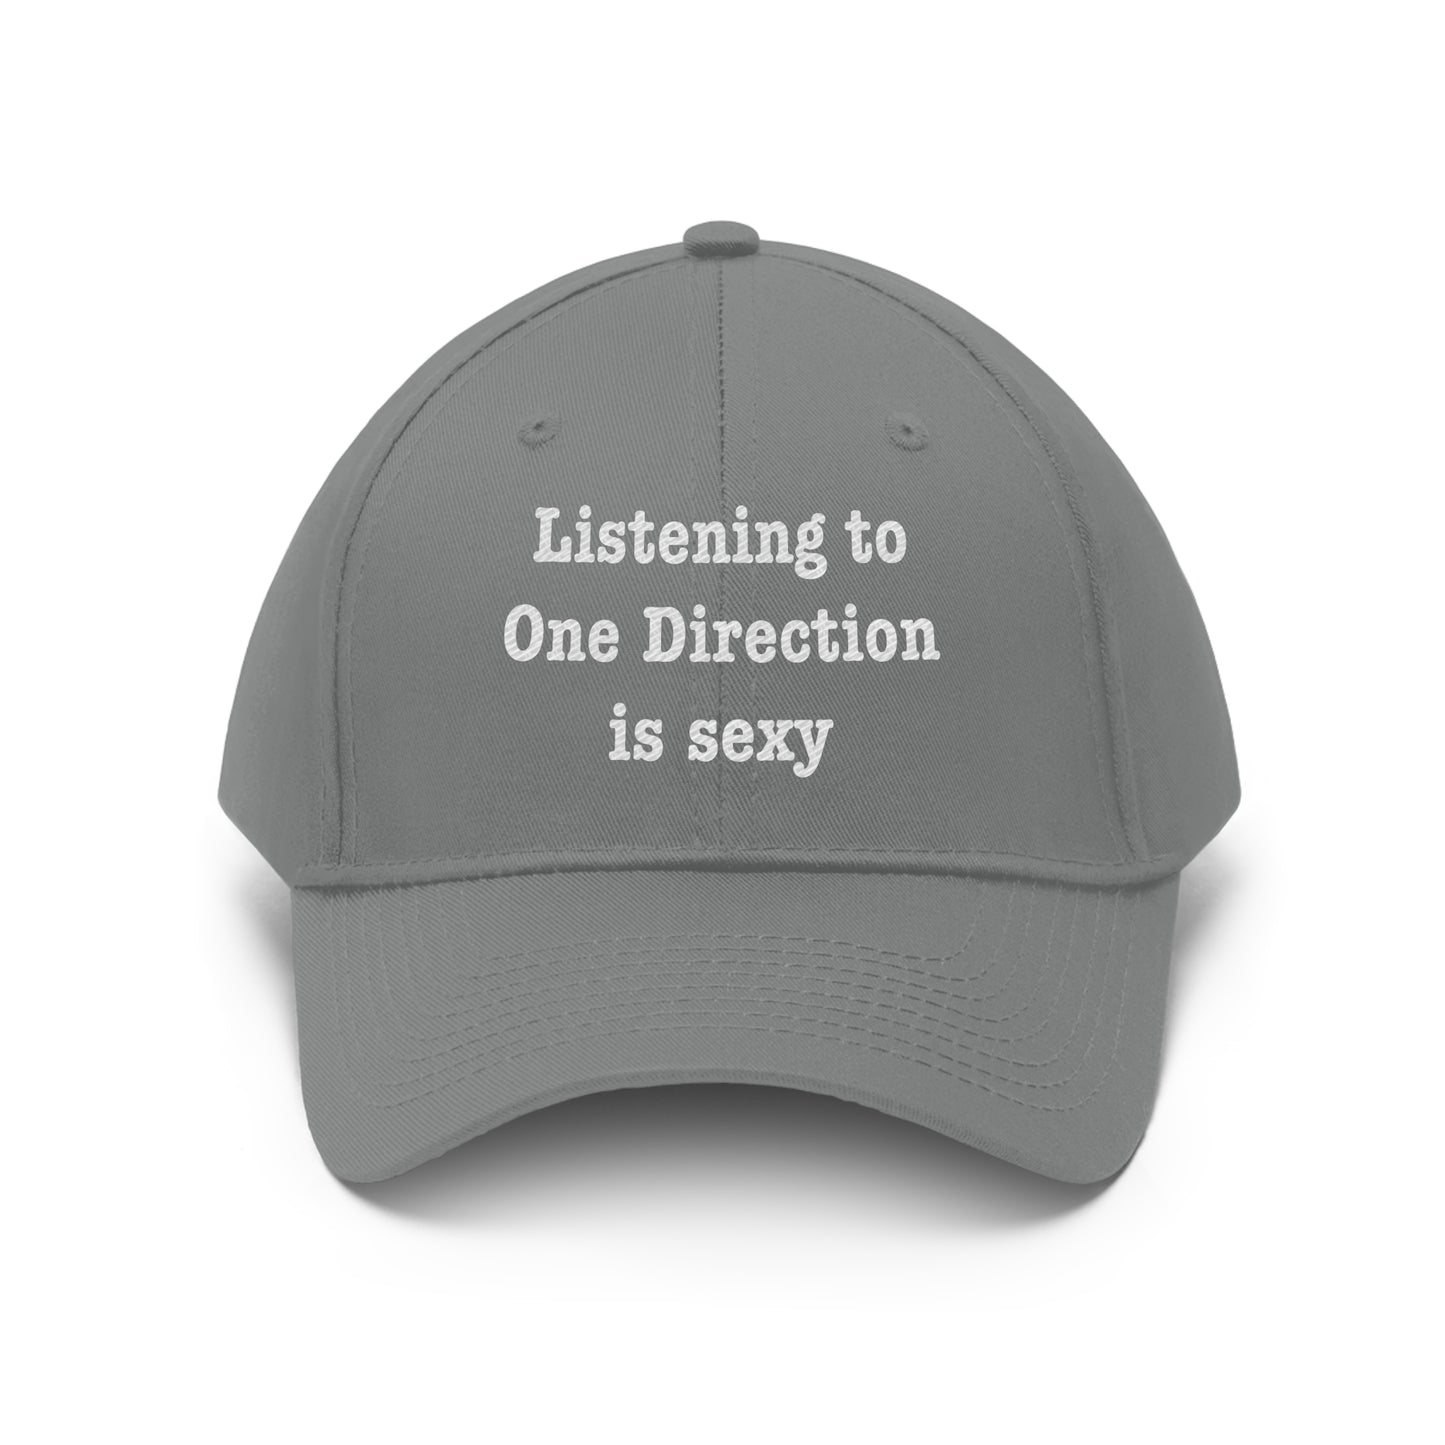 Listening to One Direction is sexy hat